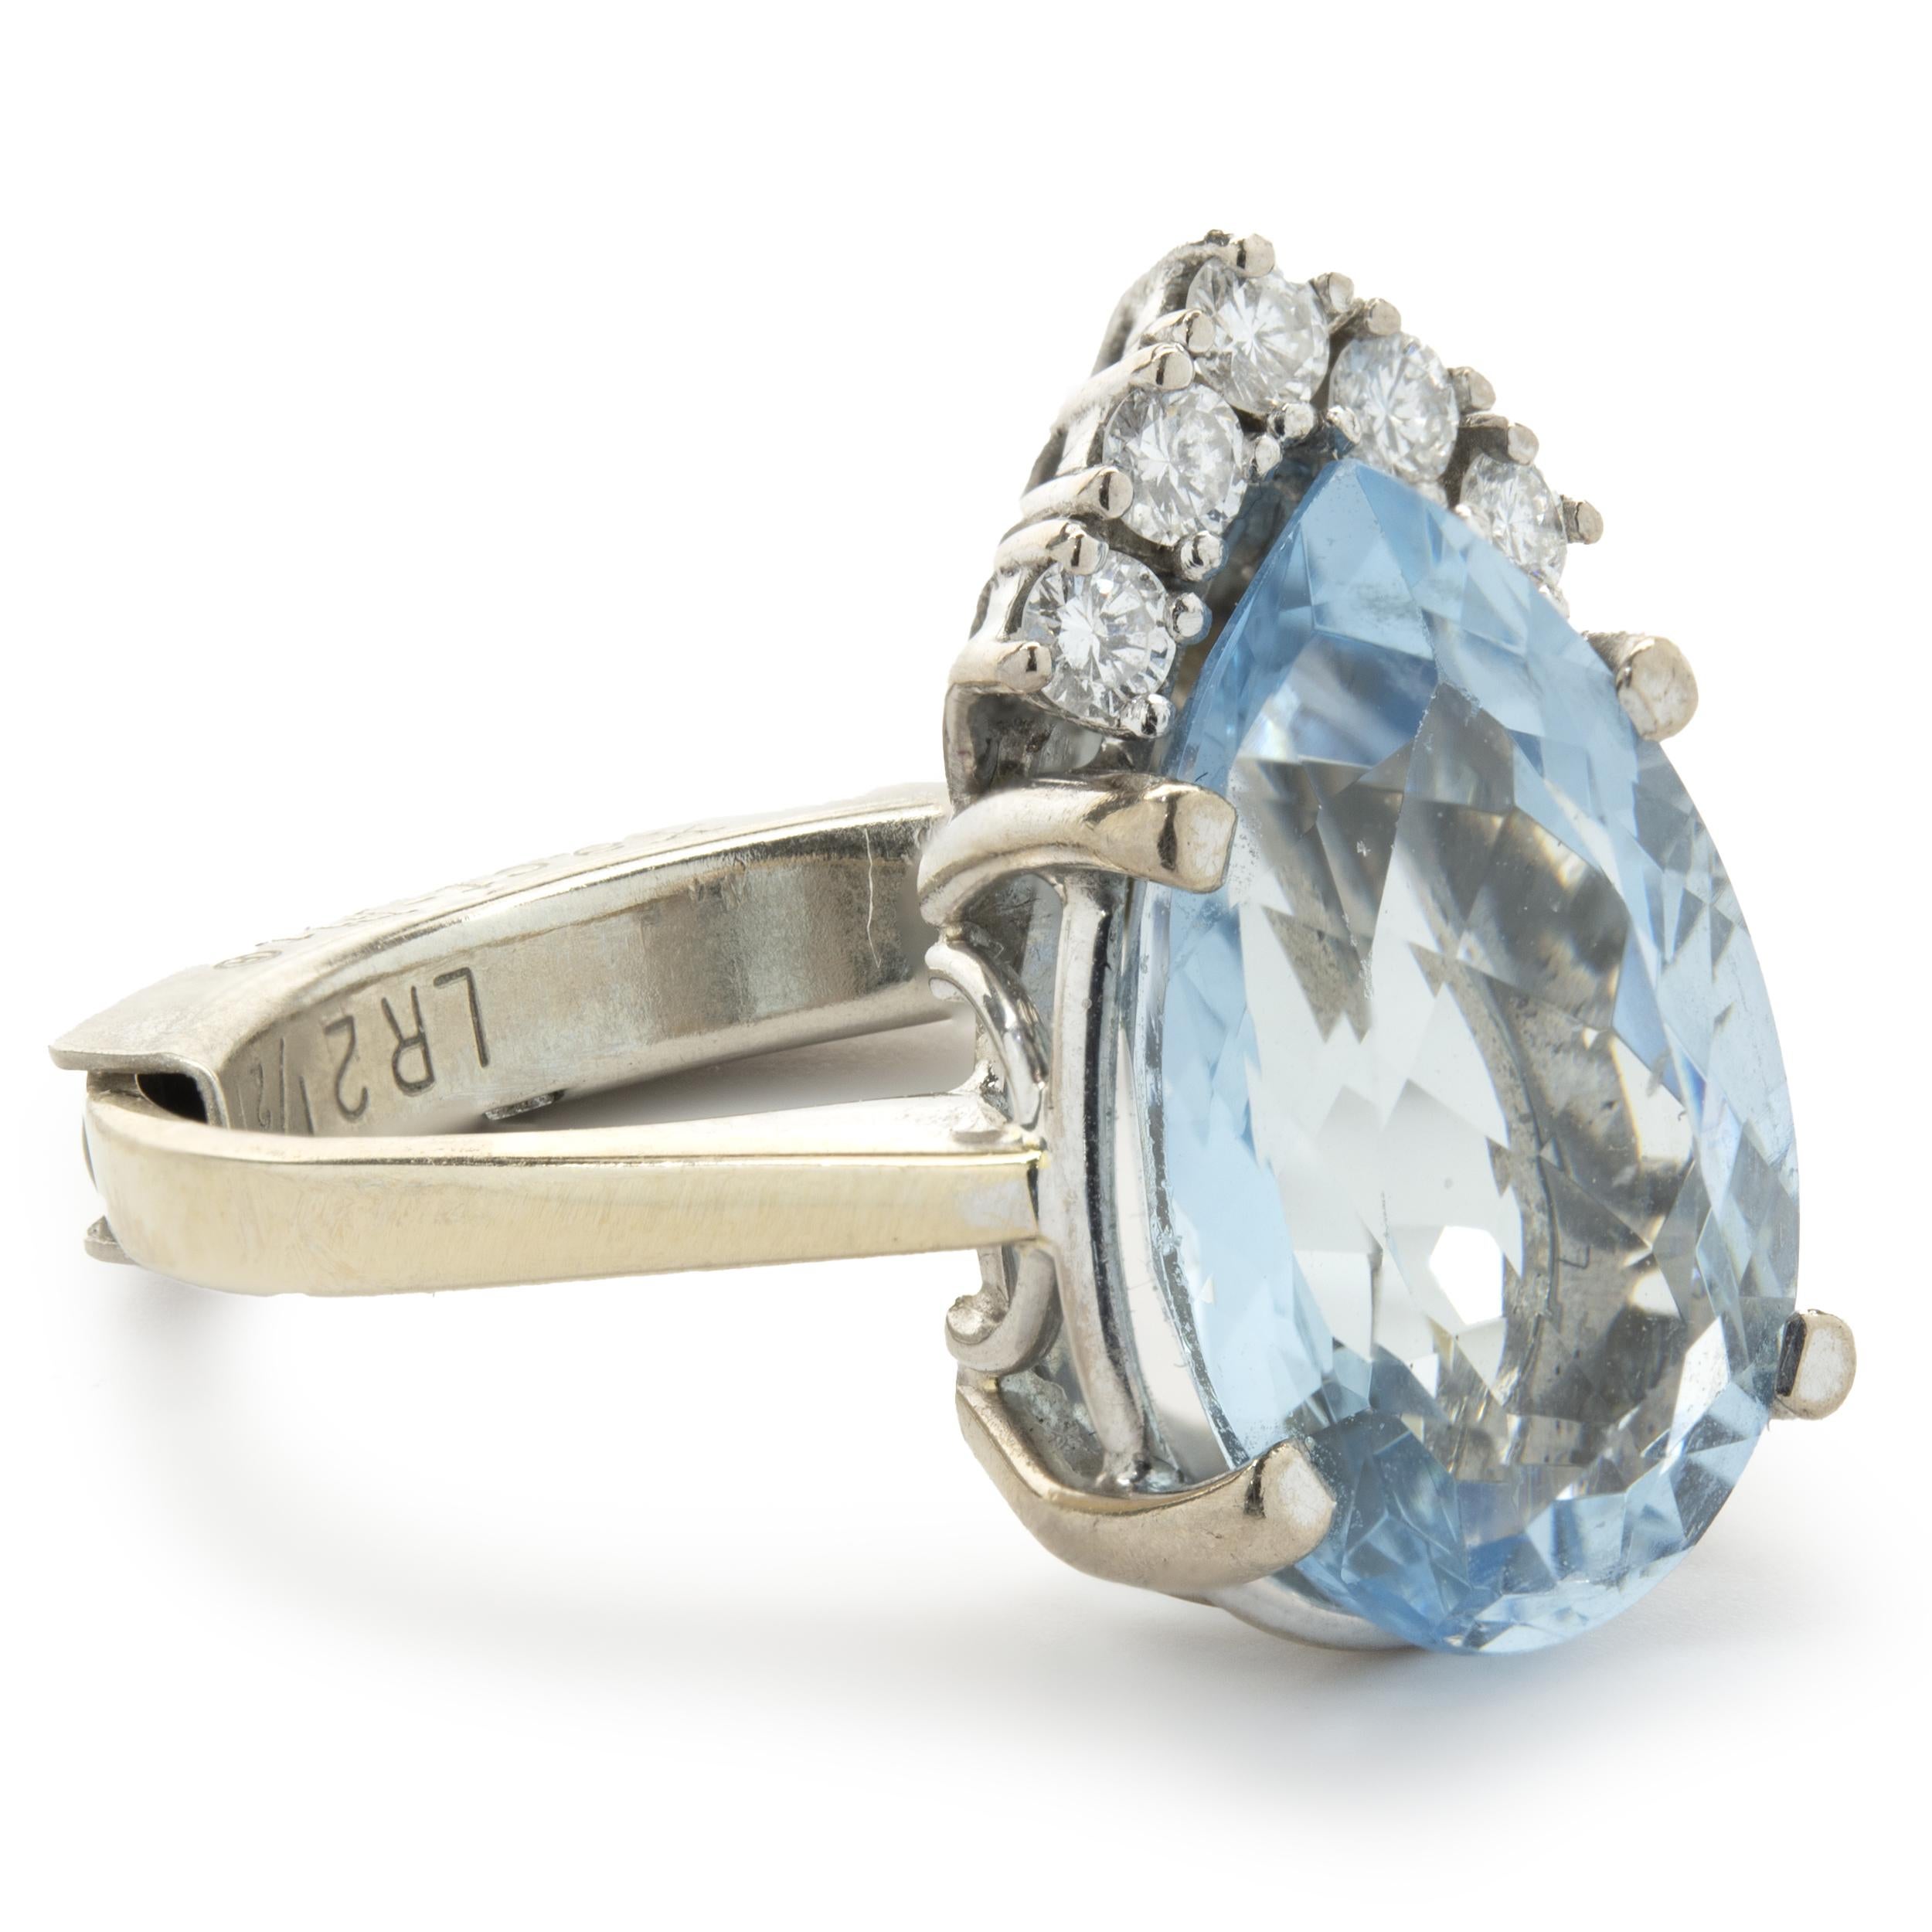 Designer : Custom
Material: 14k white gold
Aquamarine: 1 pear cut
Diamond: 5 round cut = 0.10cttw
Color: H
Clarity: SI1
Ring Size: 6 (please allow two additional shipping days for sizing requests)
Weight: 5.52 grams
